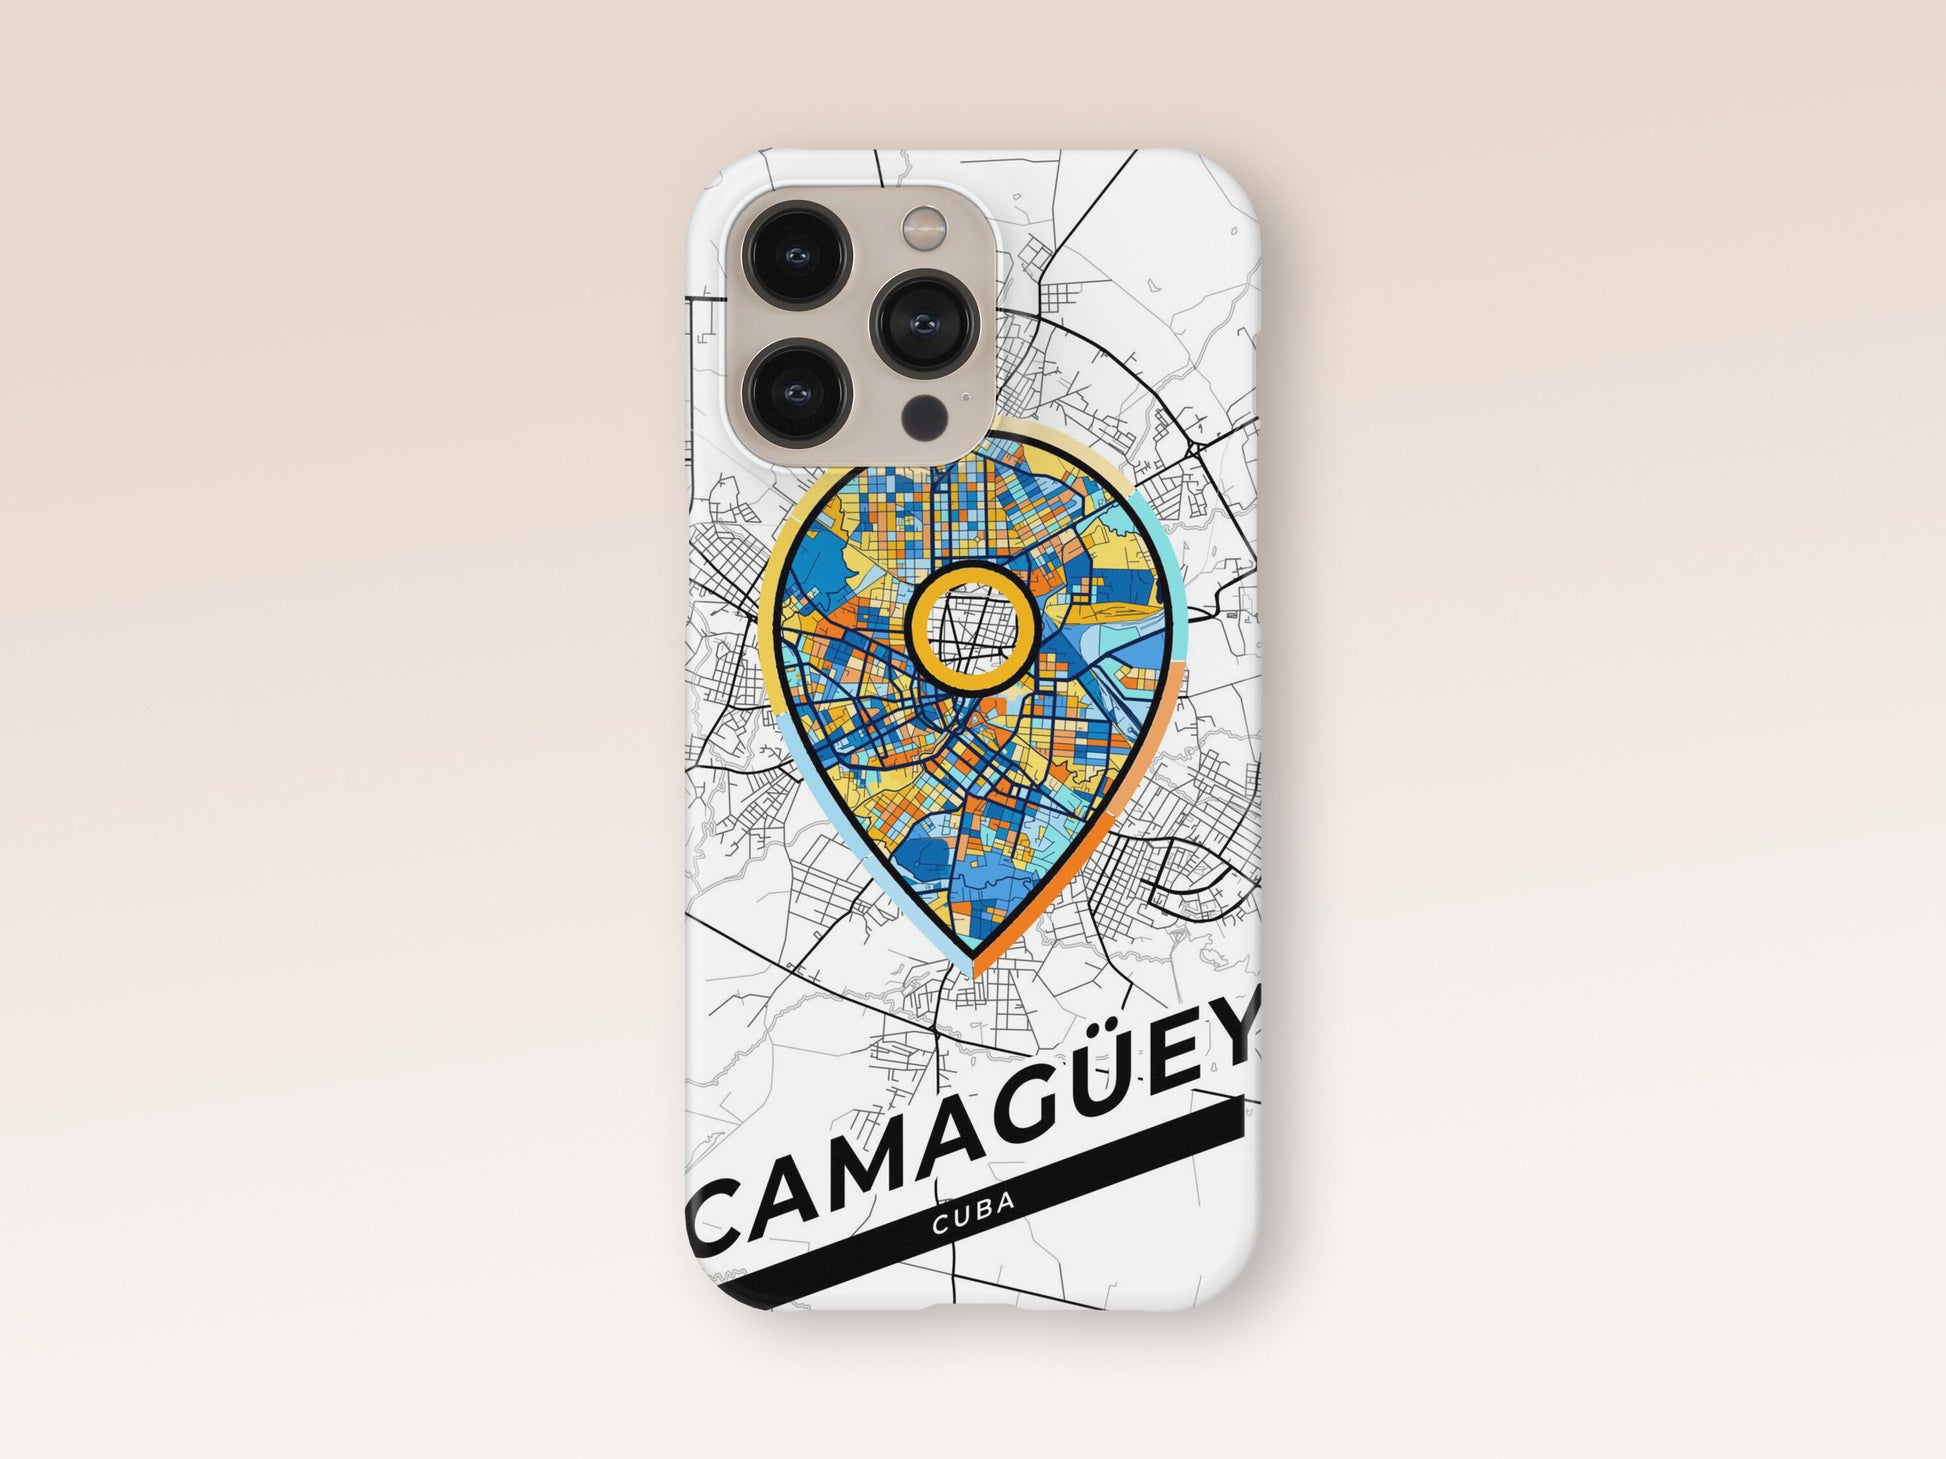 Camagüey Cuba slim phone case with colorful icon. Birthday, wedding or housewarming gift. Couple match cases. 1